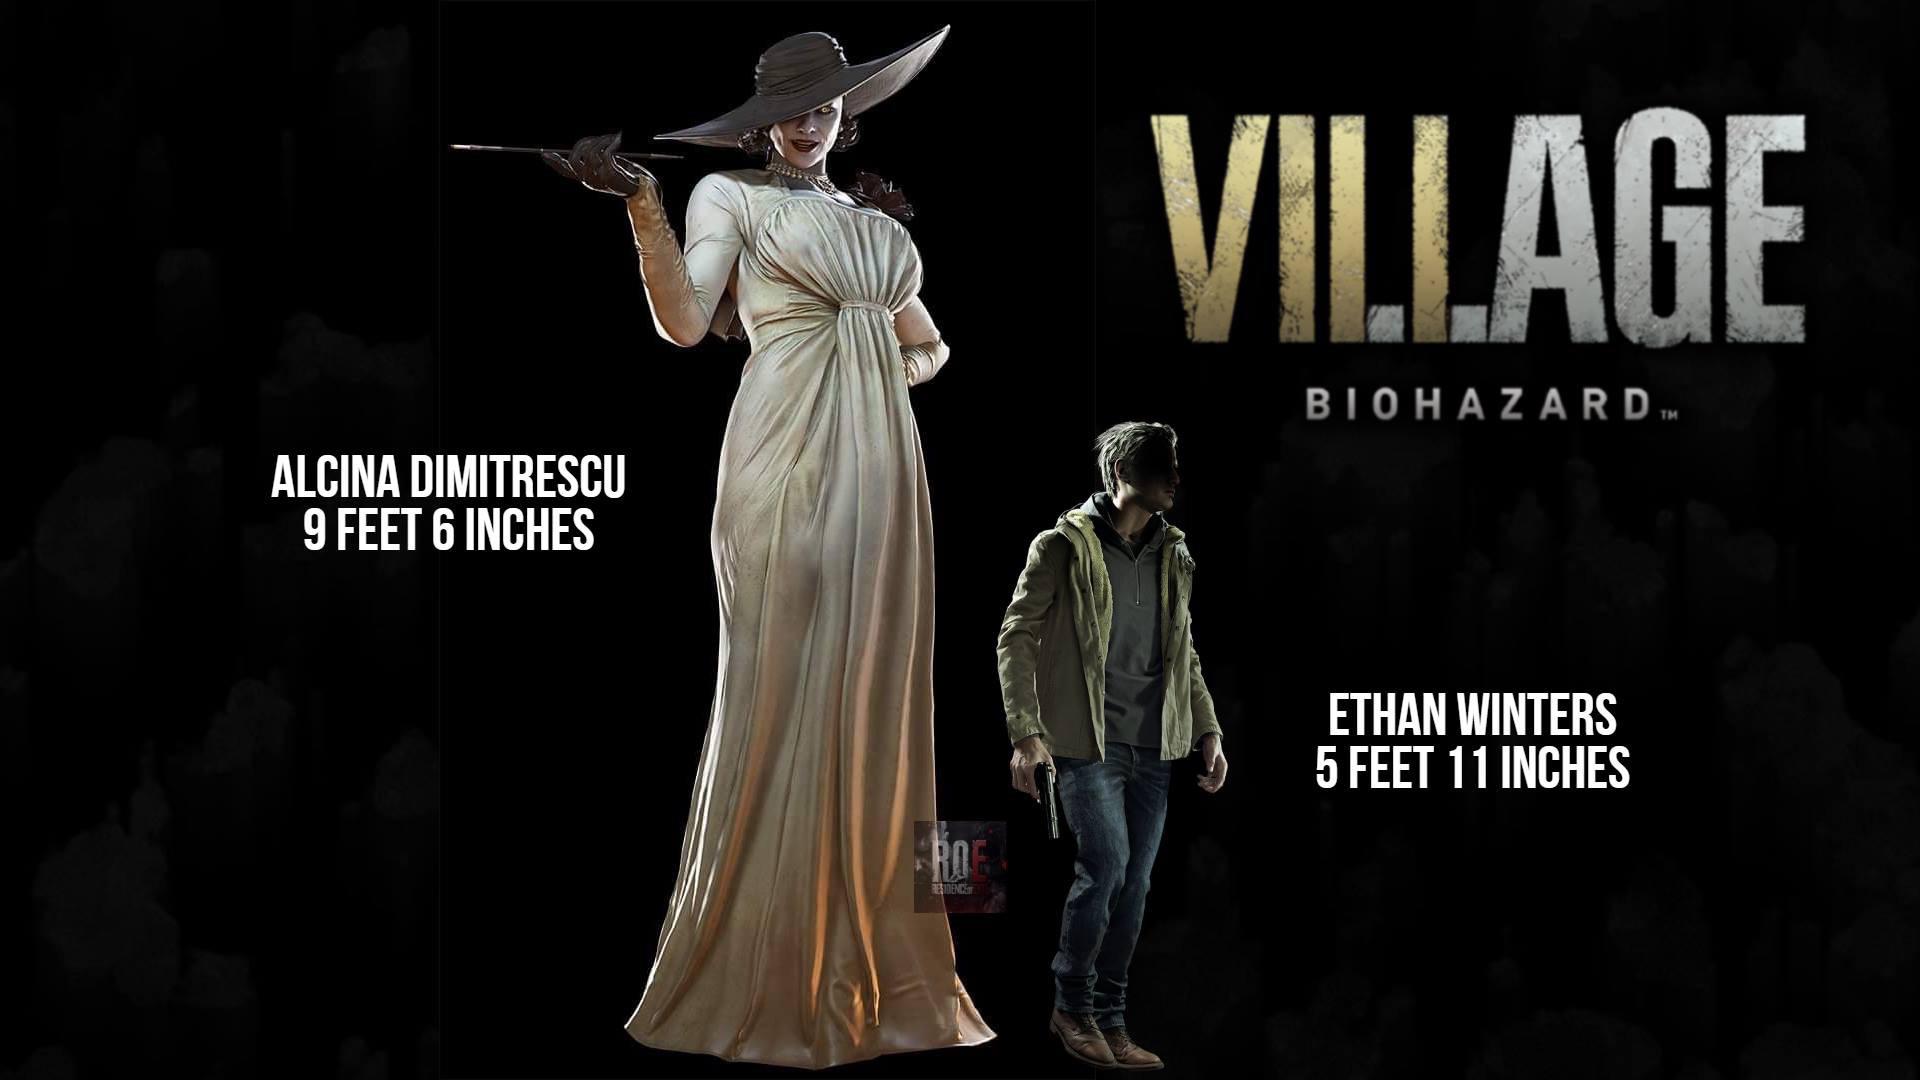 Now that we have Alcina Dimitrescu's official height in RE VILLAGE, here's an accurate comparison to Ethan Winters